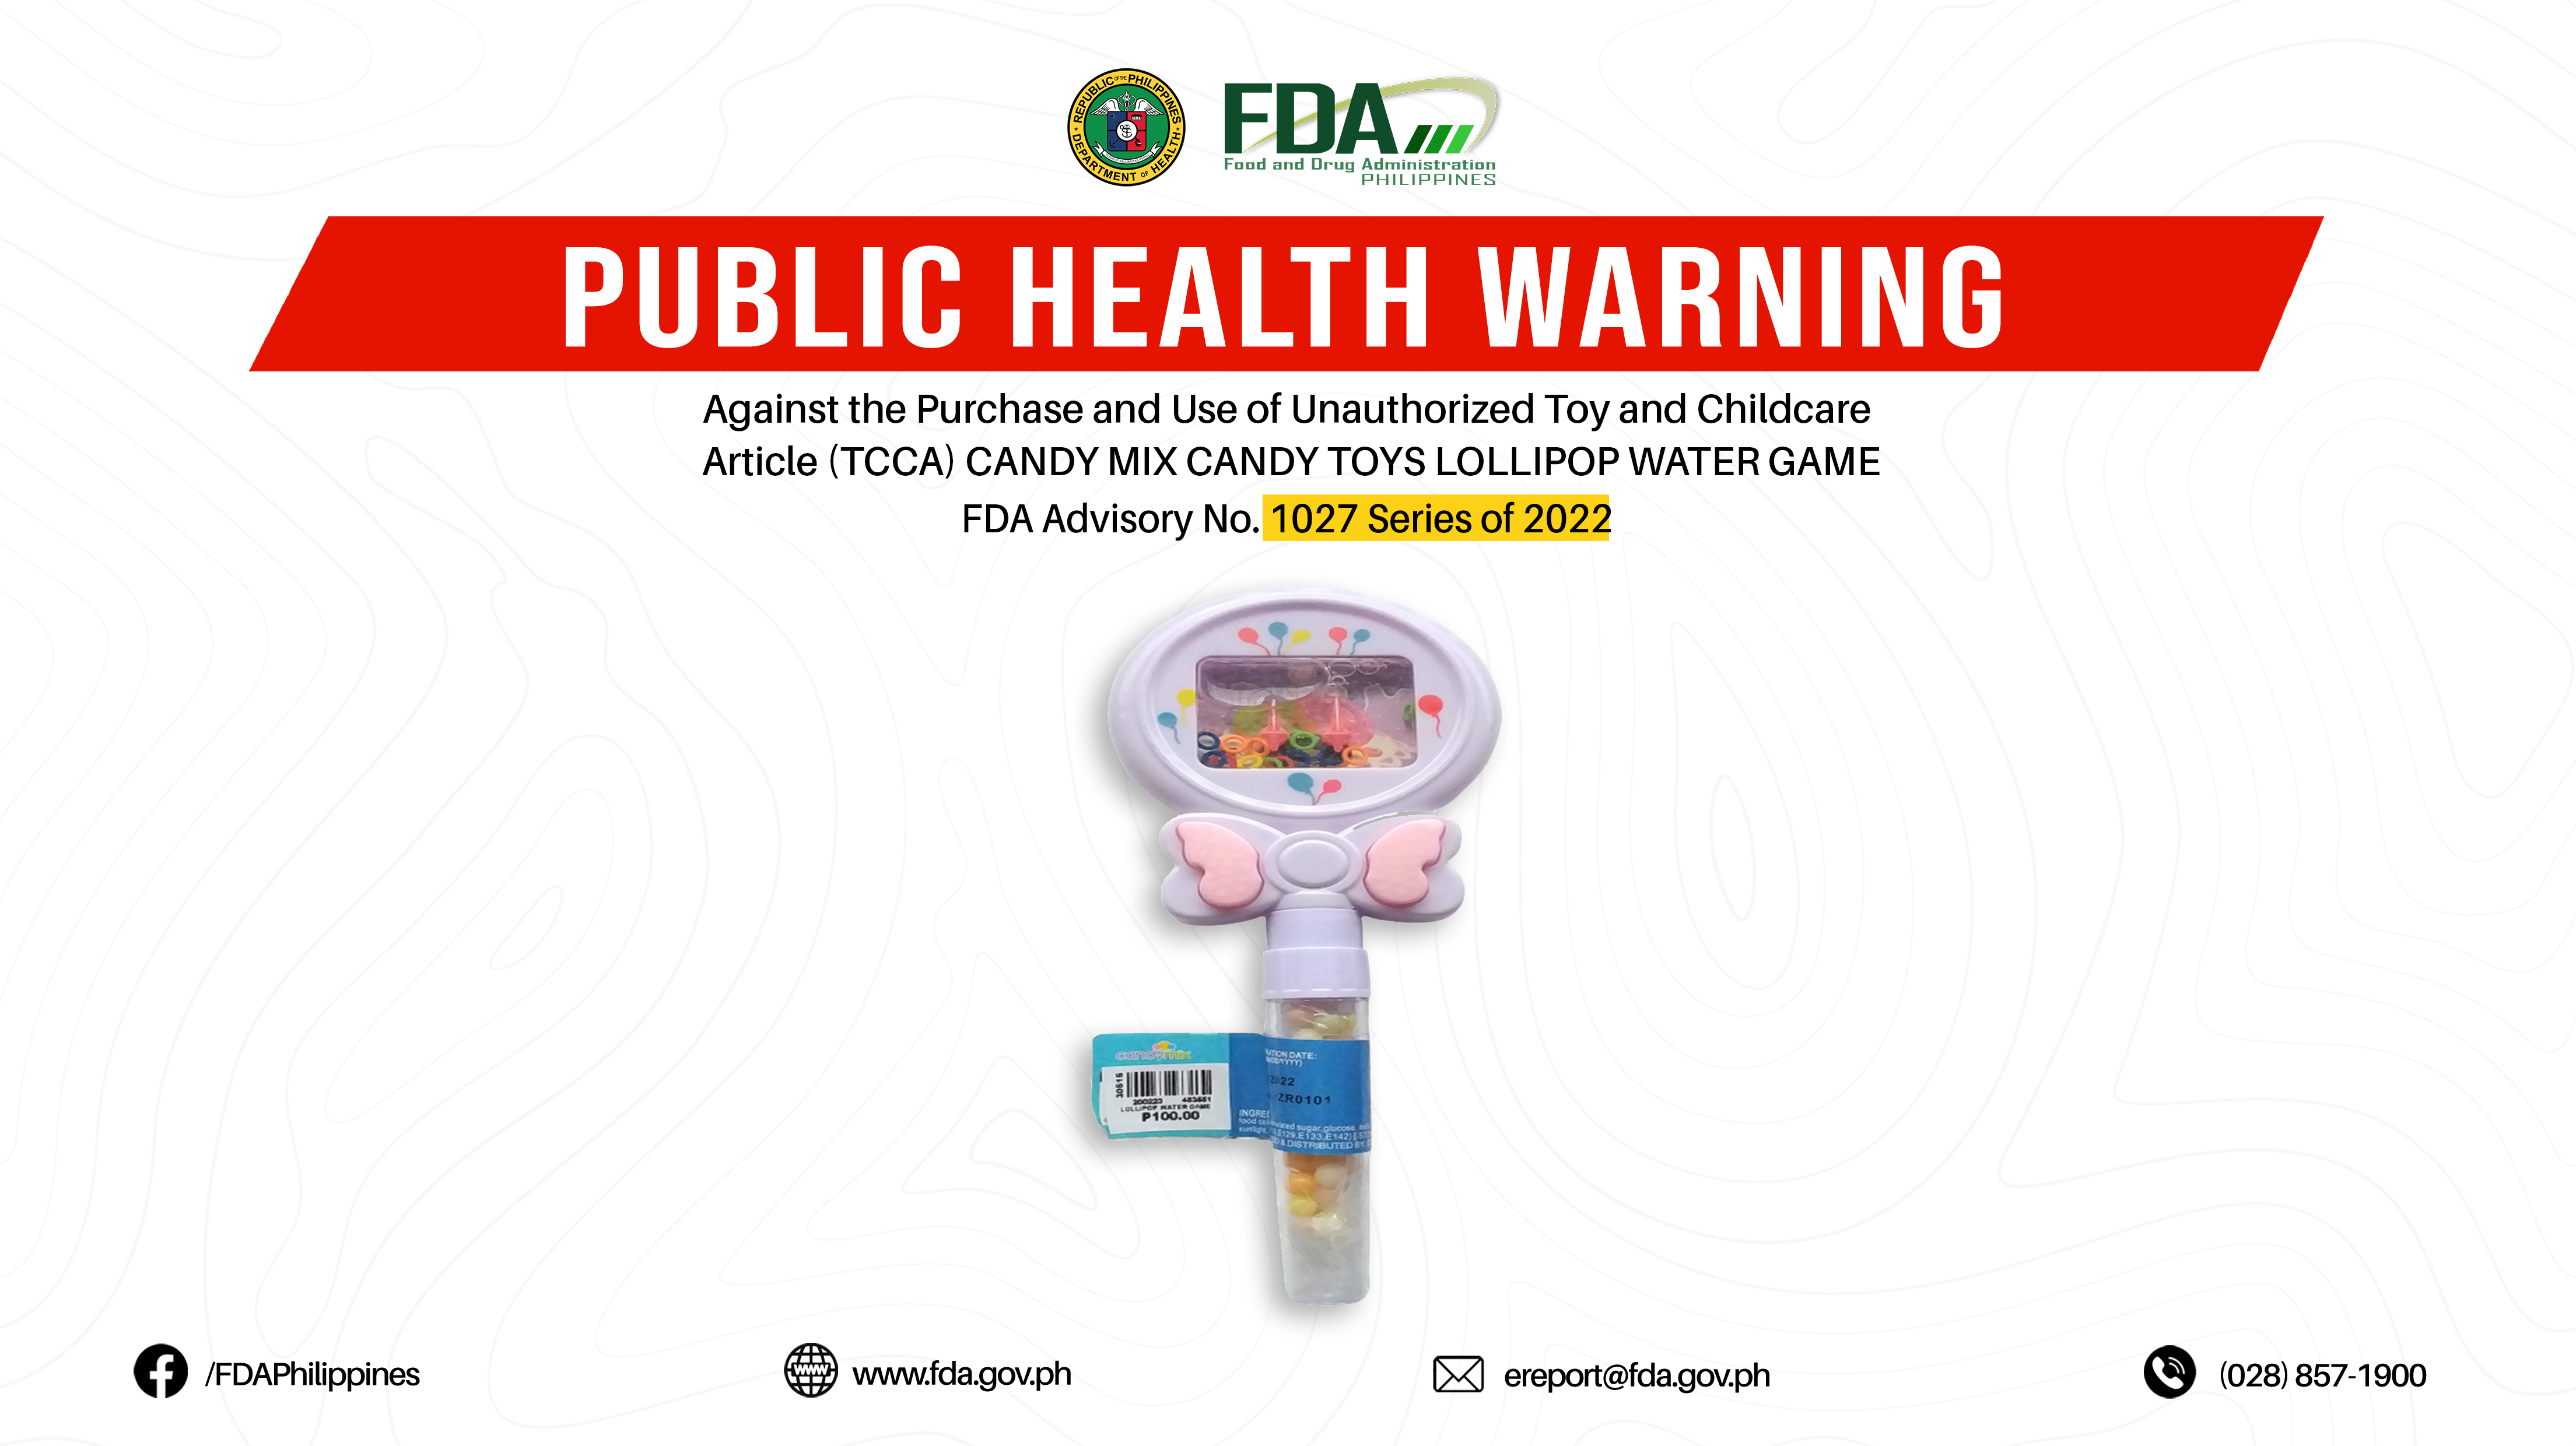 FDA Advisory No.2022-1027 || Public Health Warning Against the Purchase and Use of Unauthorized Toy and Childcare Article (TCCA) CANDY MIX CANDY TOYS LOLLIPOP WATER GAME